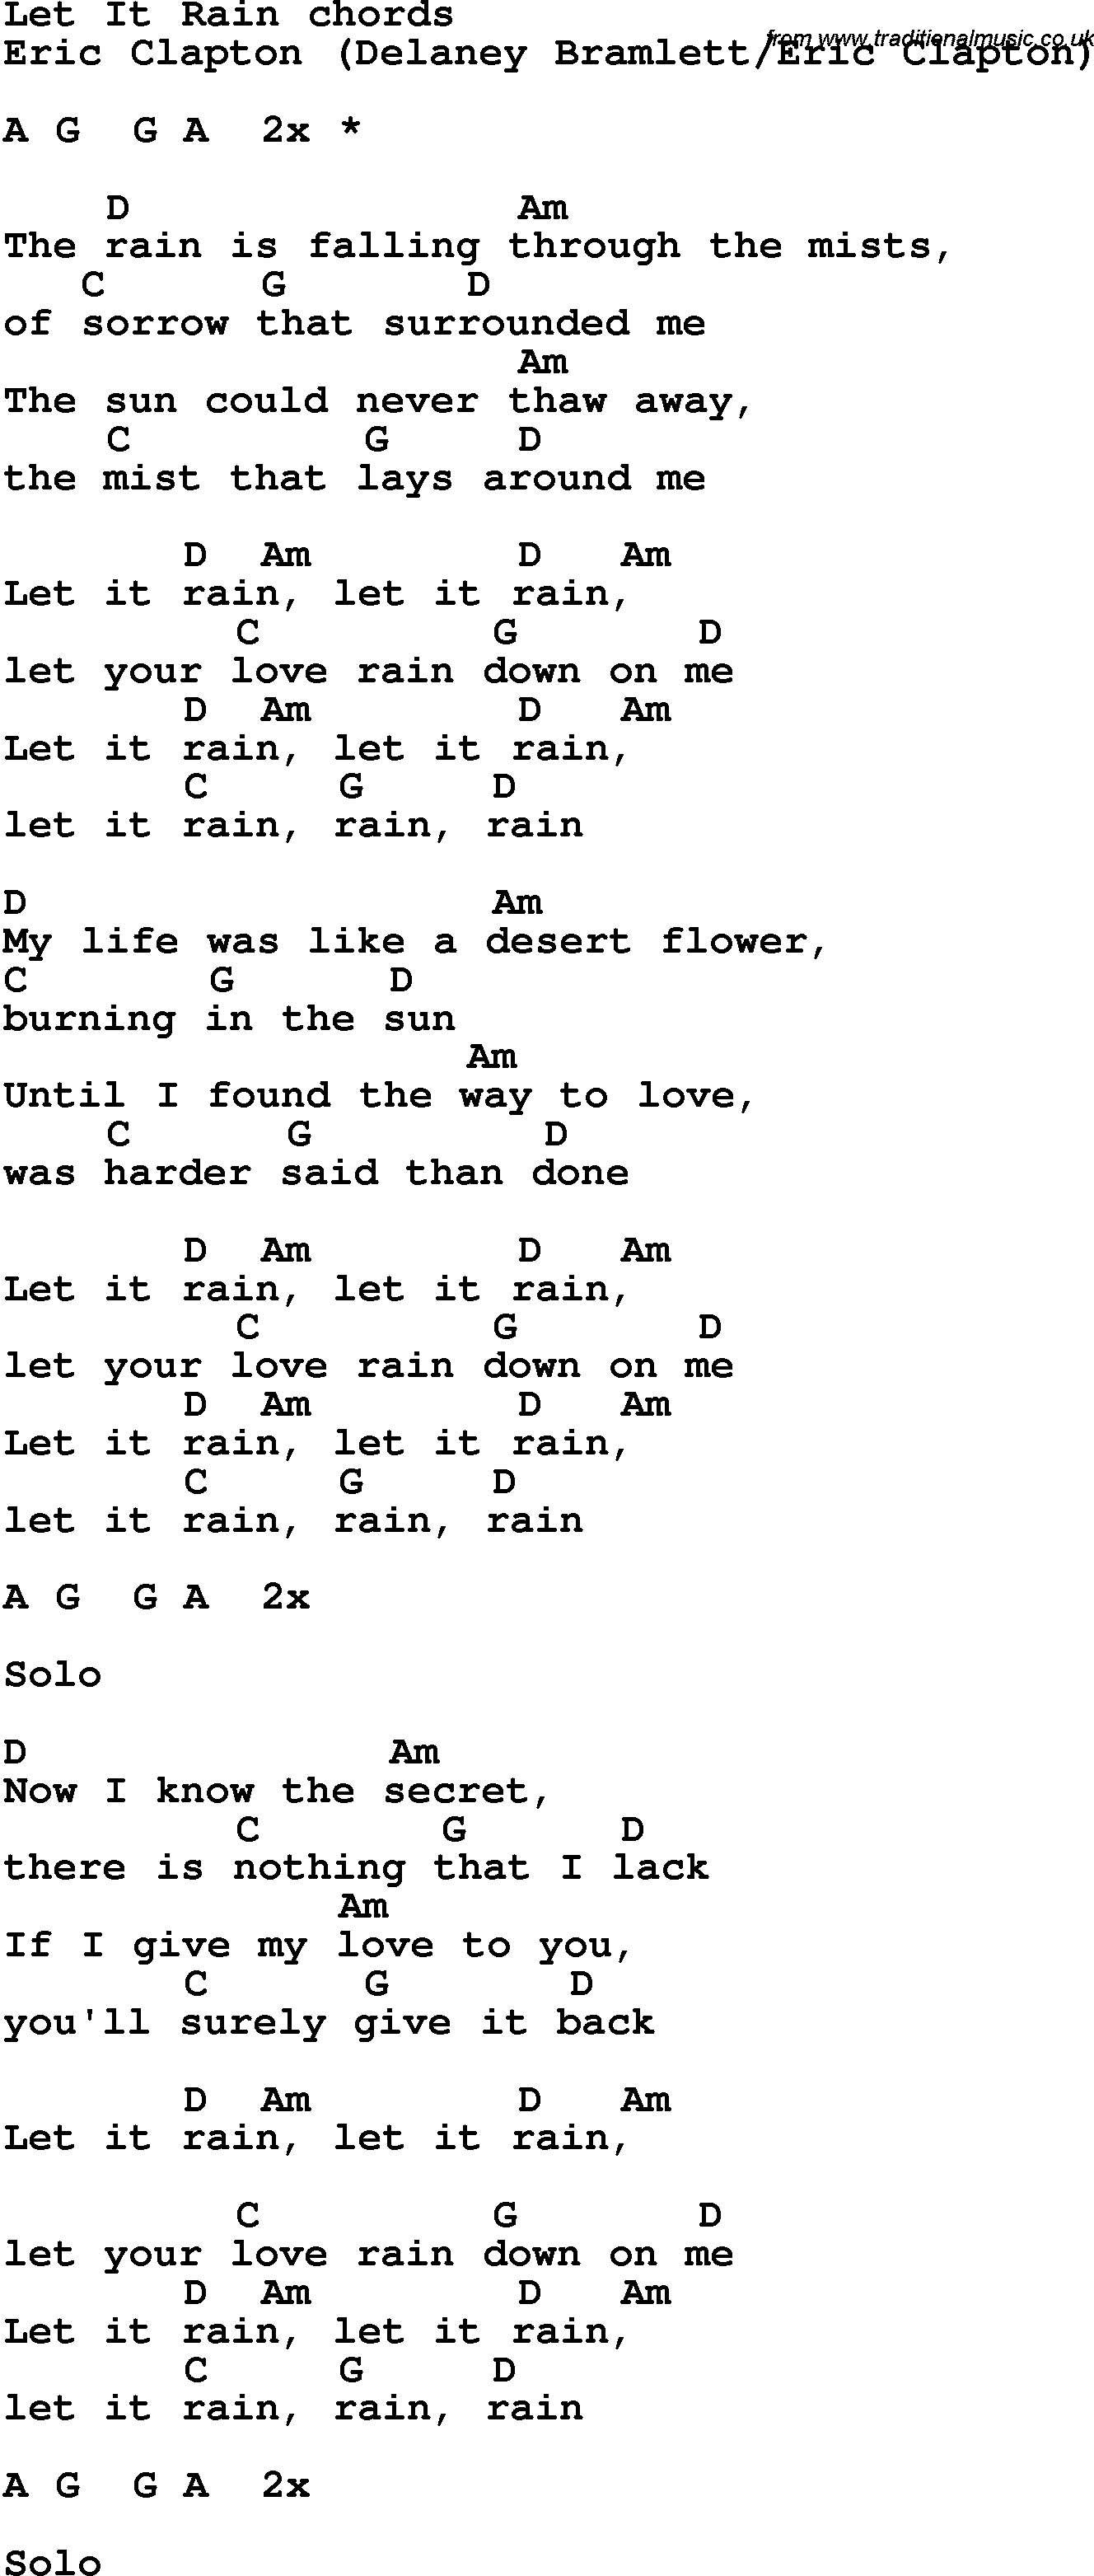 Song Lyrics with guitar chords for Let It Rain